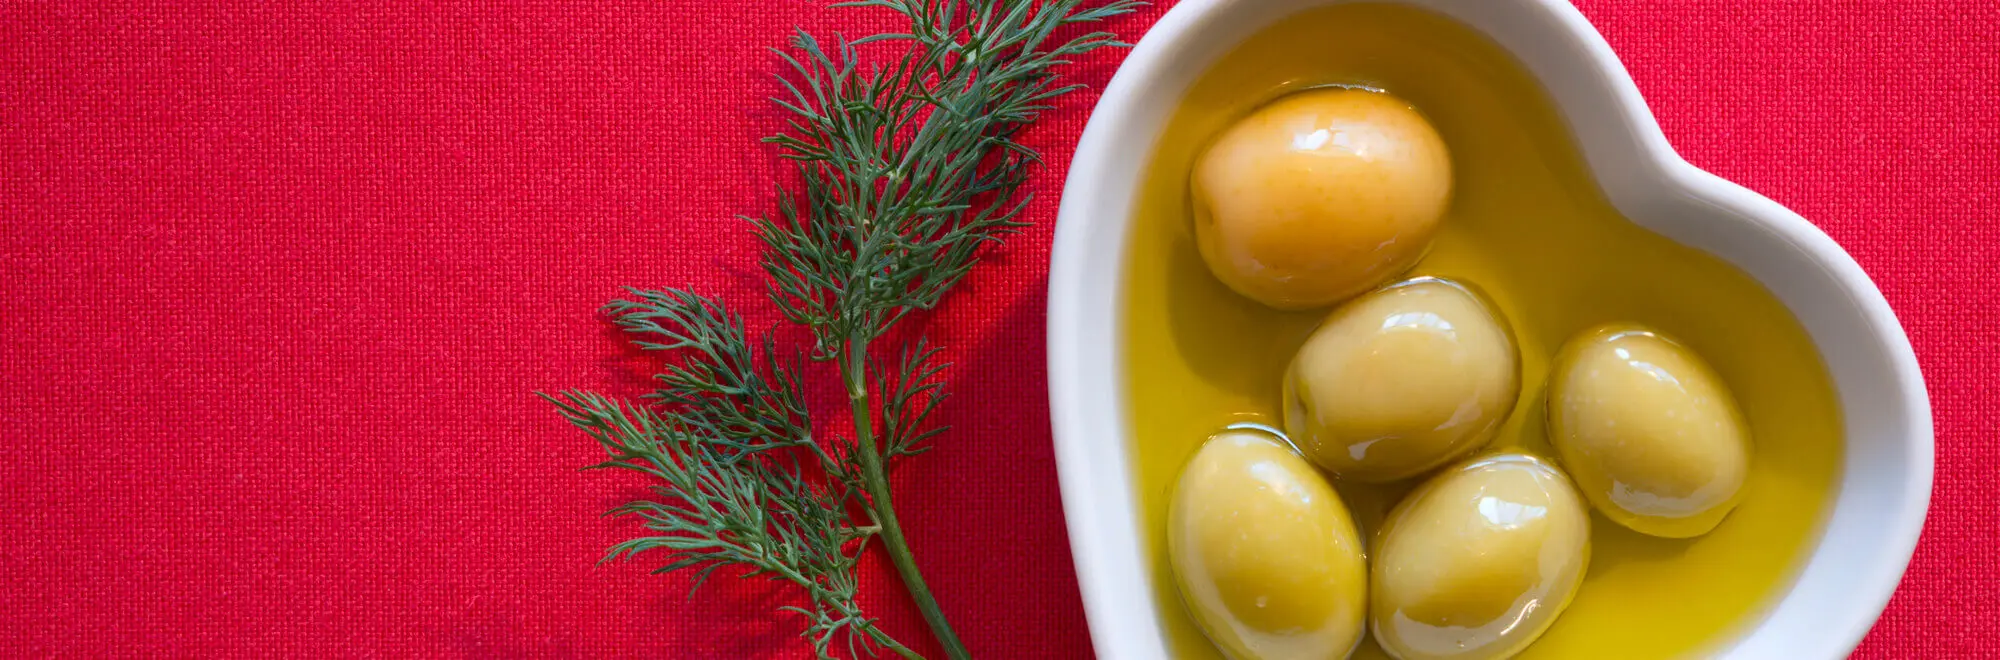 How to reduce high cholesterol with olive oil